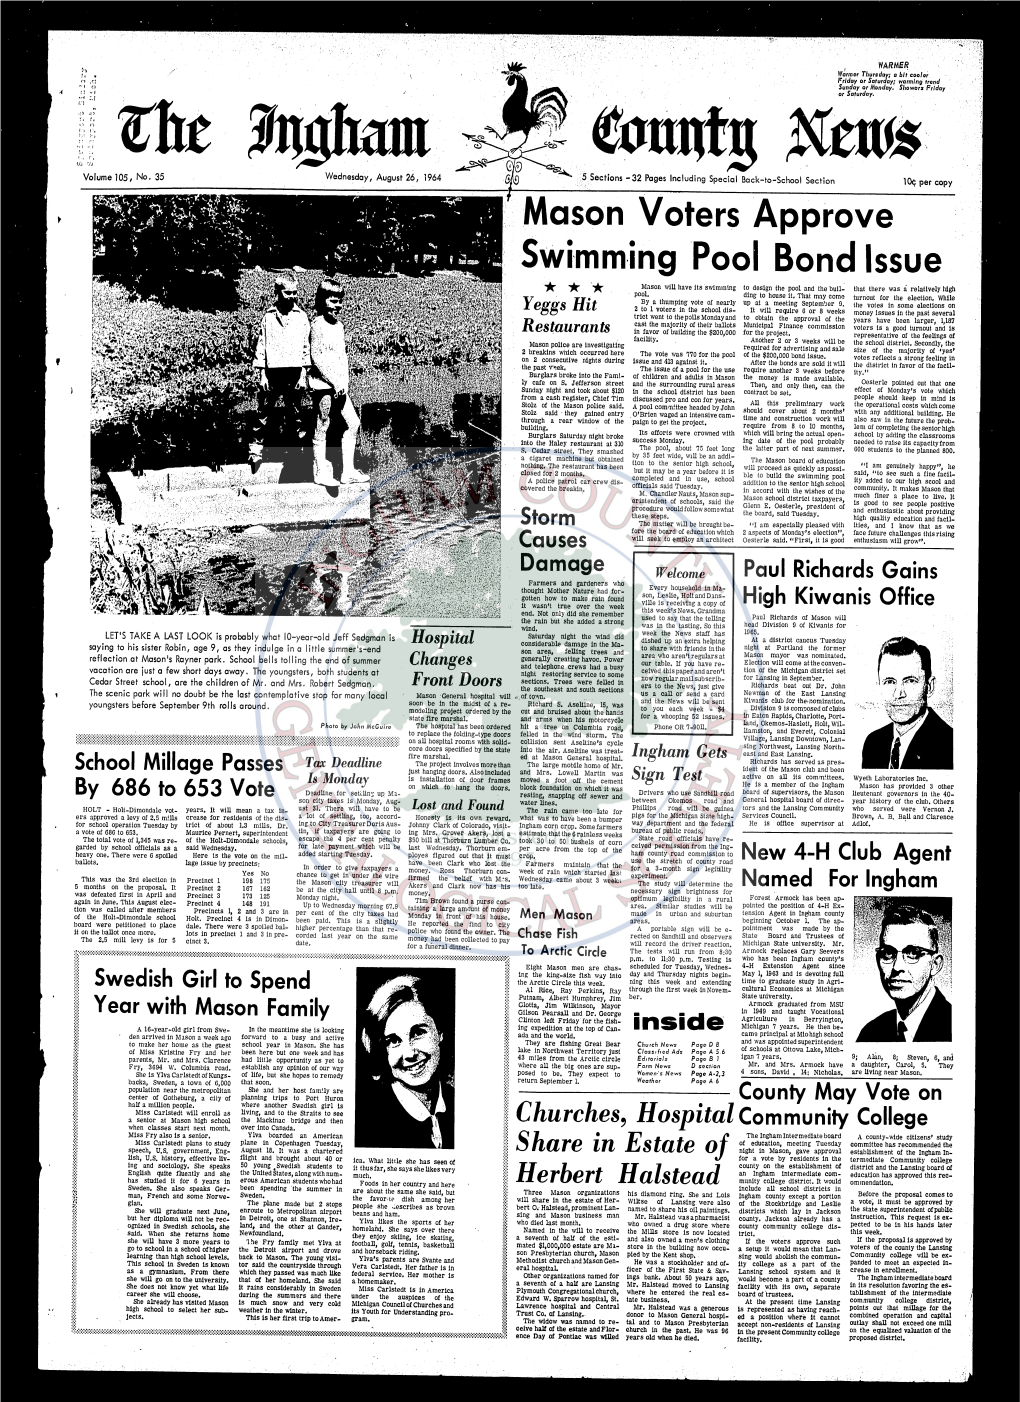 The Ingham County News, Wednesday, August 26, 1964 - Page A-2